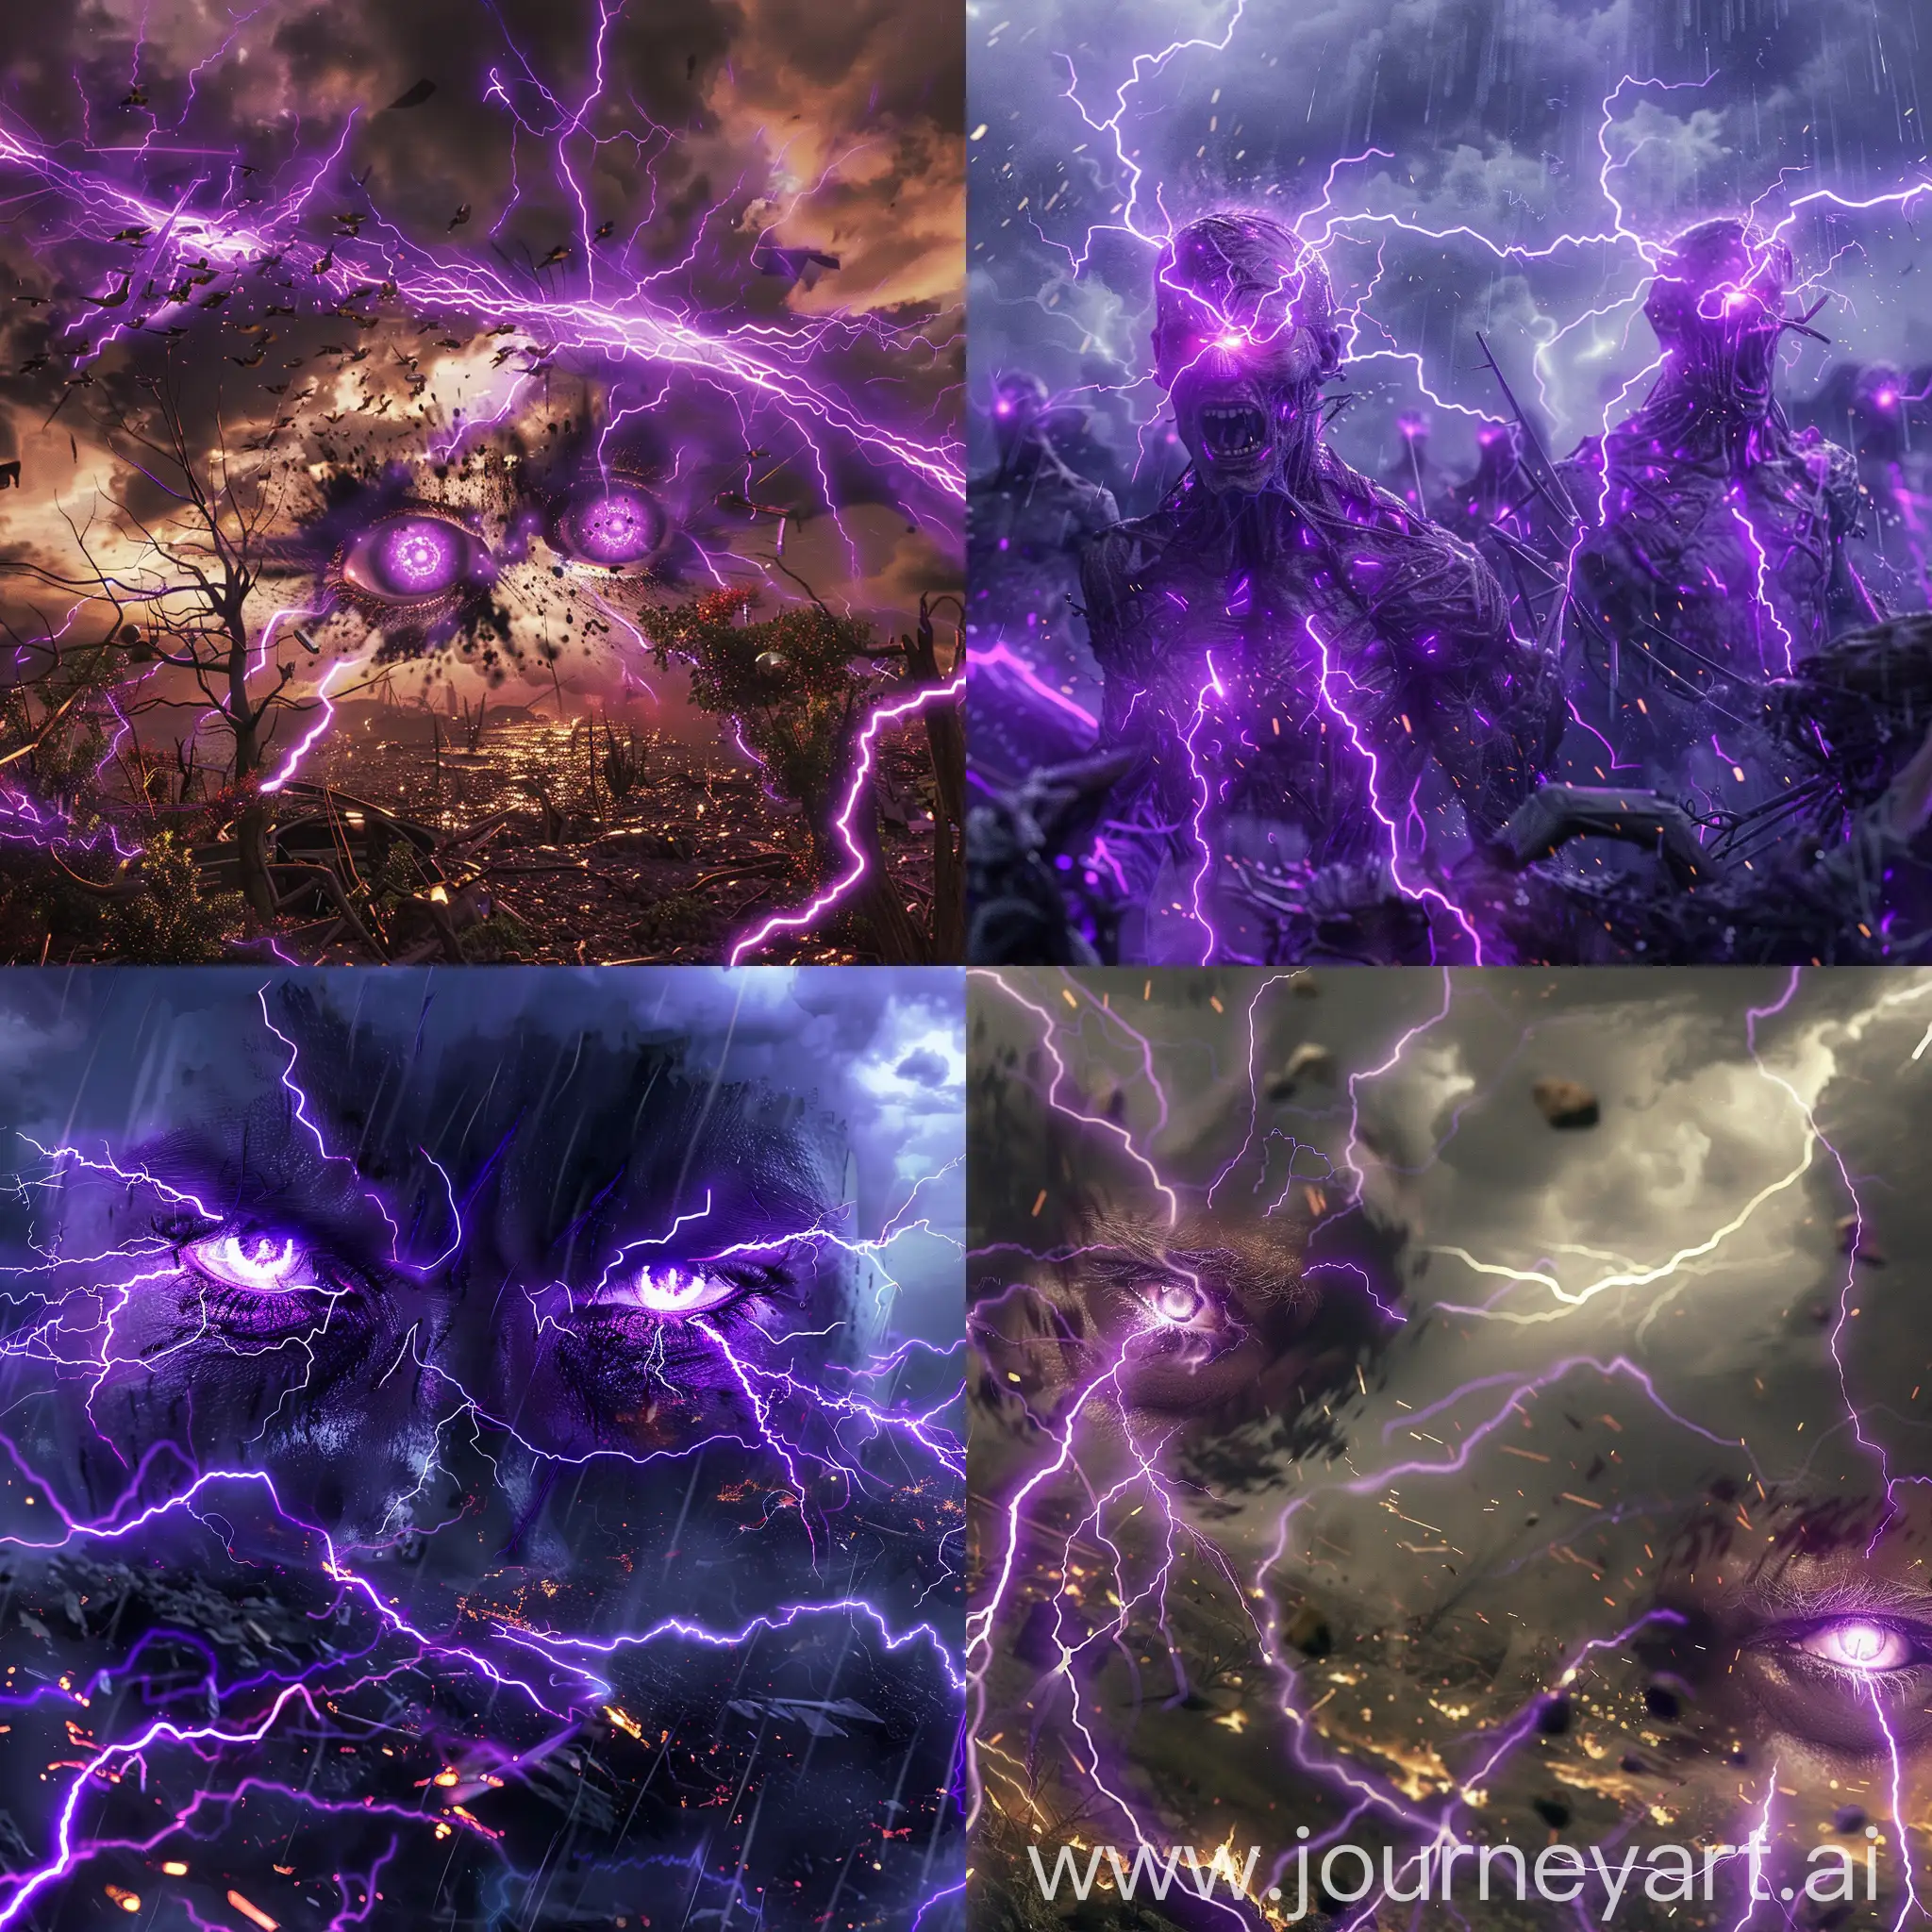 https://www.brawlstarsdicas.com.br/wp-content/uploads/2020/12/edgar-brawl-stars-render-ilustration.png  Much anger and purple lightning emanating from the bodies and eyes with purple light, and the environment devastated